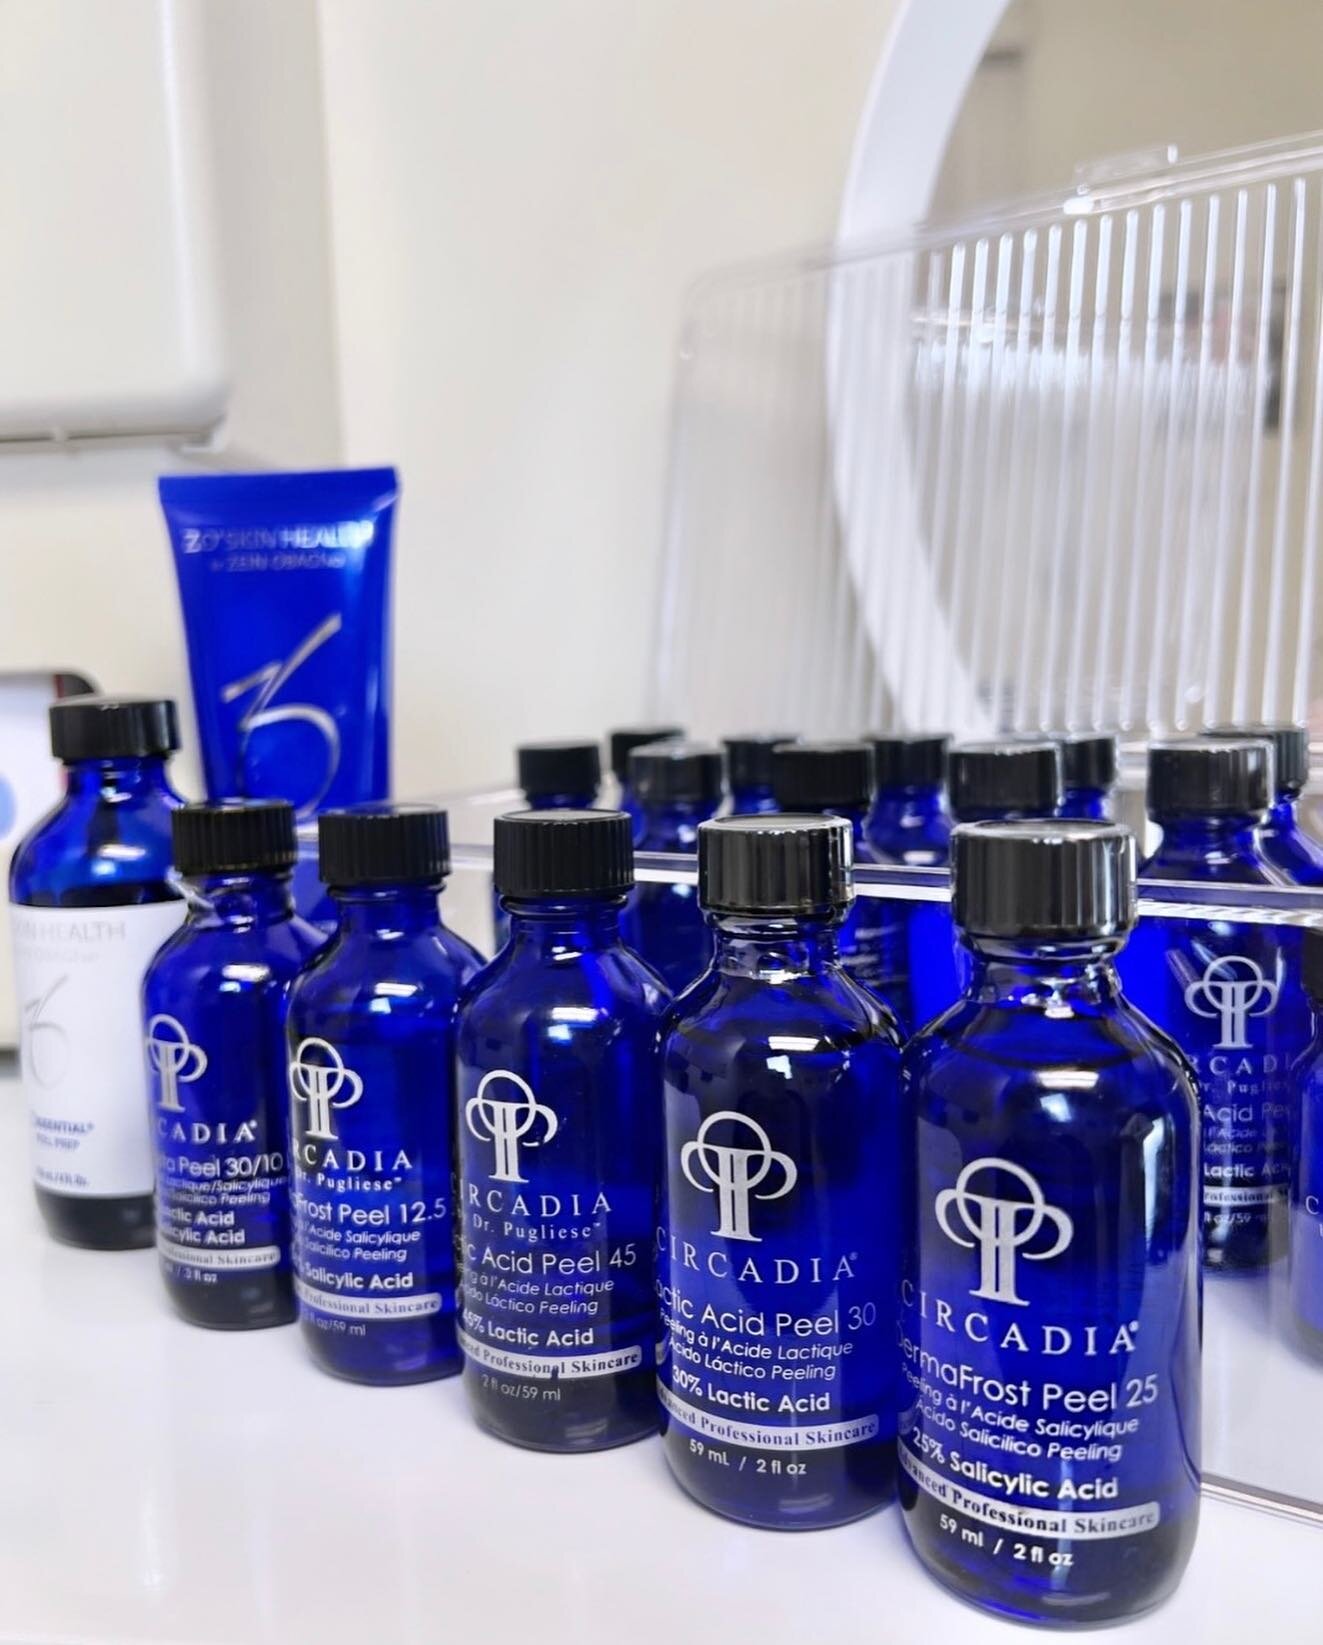 😊 A few benefits of why you should get a Chemical Peel ▫️Improve Tone ▫️Improve Texture ▫️Improve Health of Problematic Skin ▫️Remove sun and age spots. ▫️Stimulate collagen growth ▫️Decrease the appearance of fine lines and wrinkles.
@circadia

🔹H